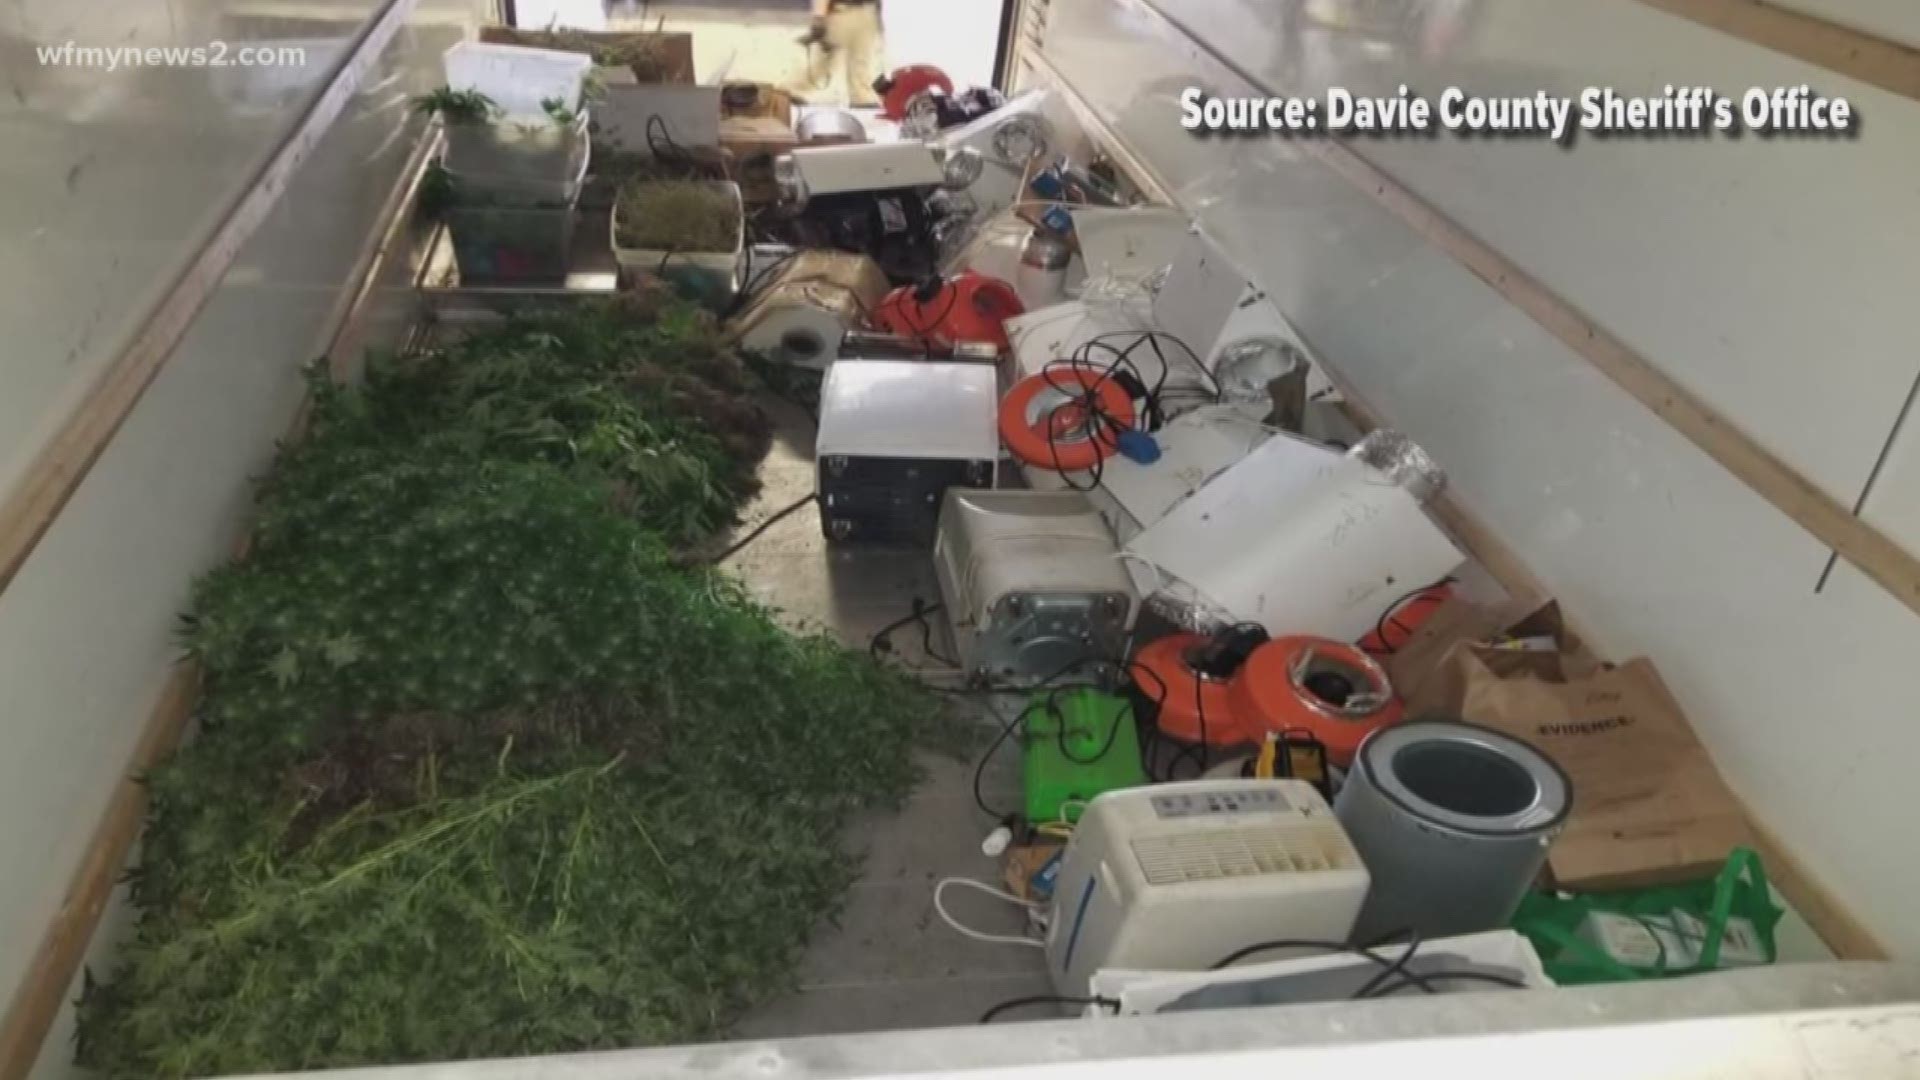 They seized more than 700 marijuana plants weighing about 127 pounds.